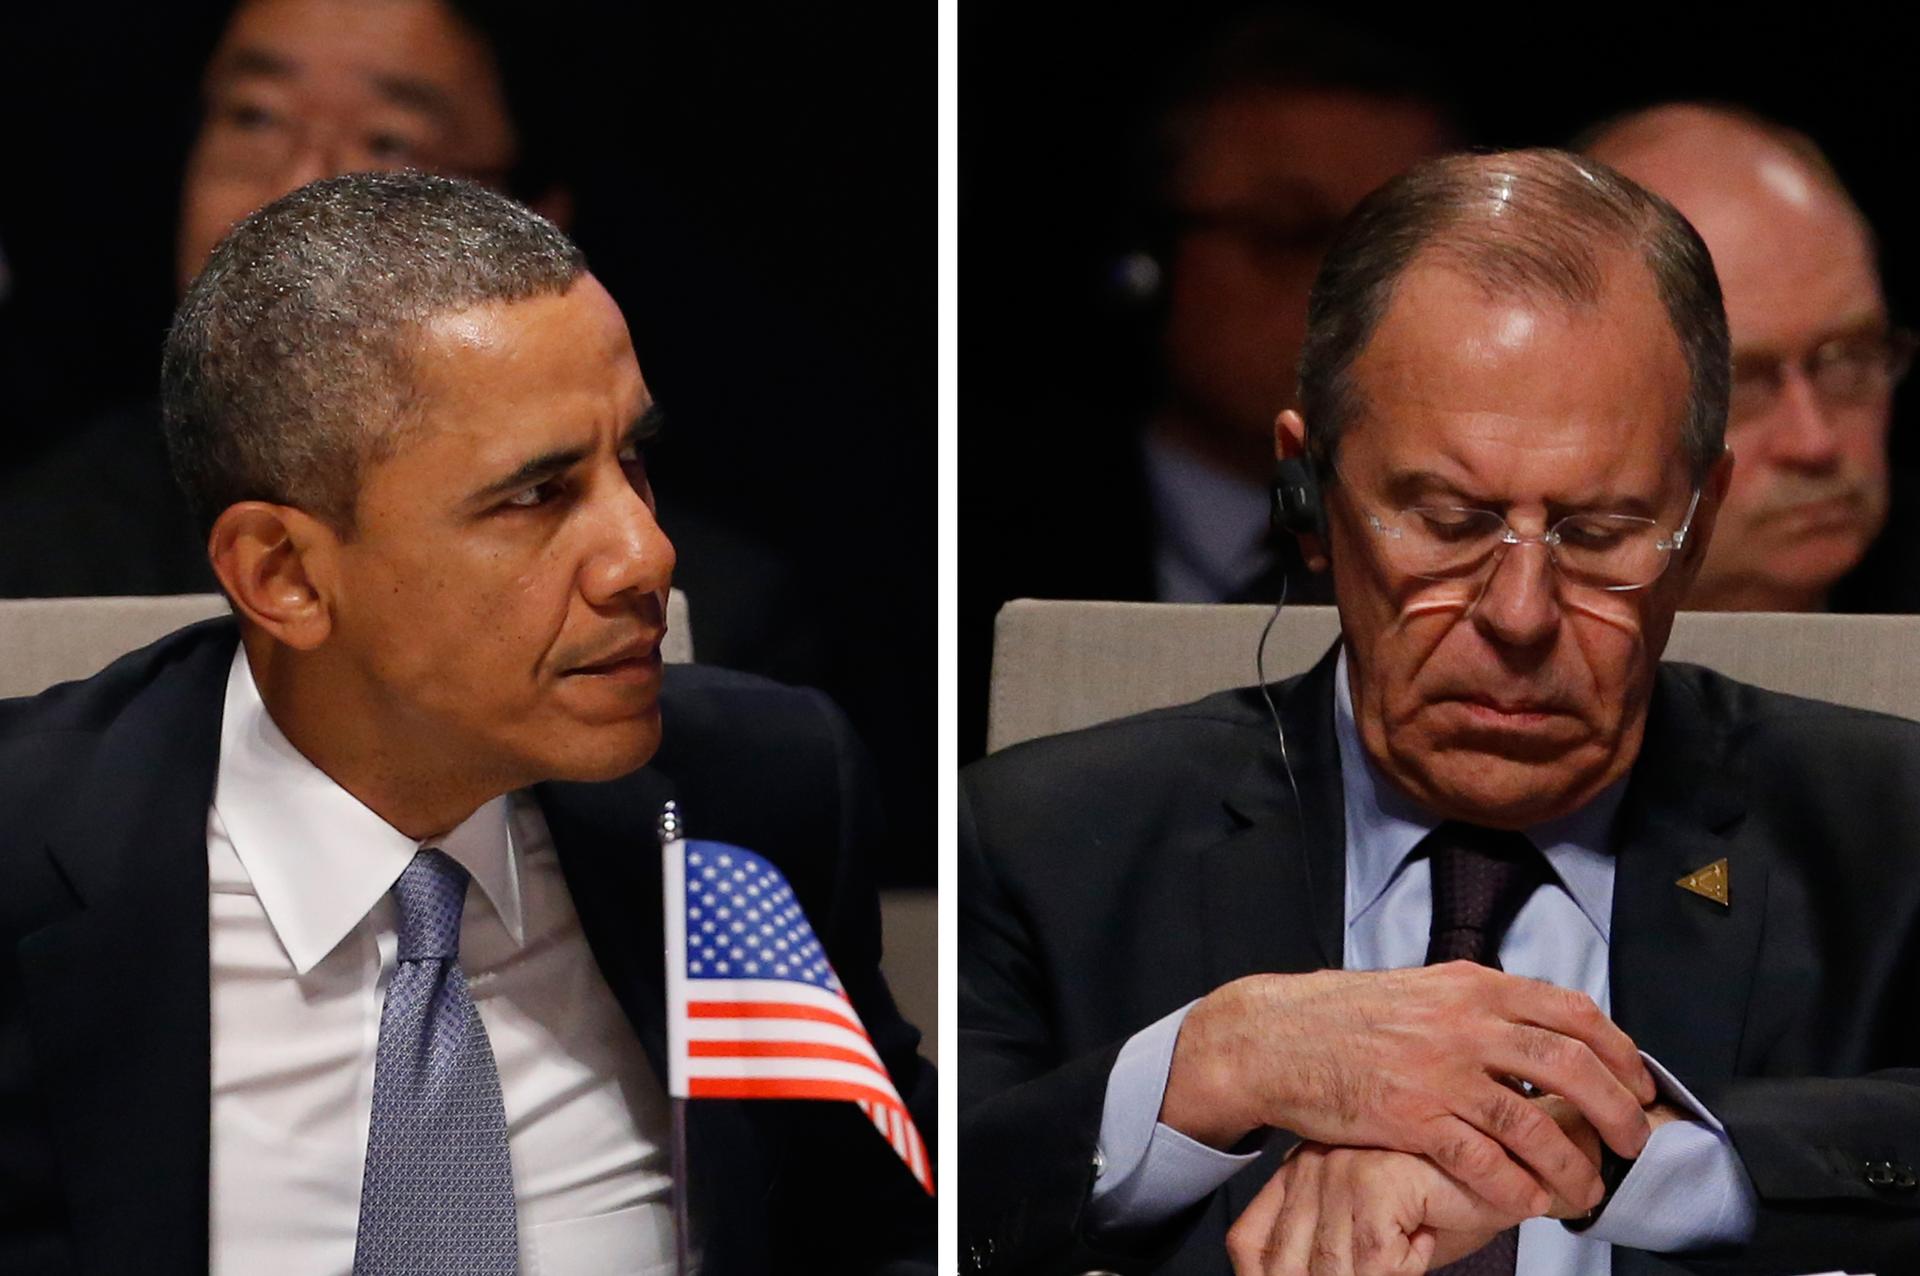 President Barack Obama and Russia's foreign minister, Sergey Lavrov, are seen in this combination photo as they attend the opening ceremony of the Nuclear Security Summit in The Hague on March 24, 2014.